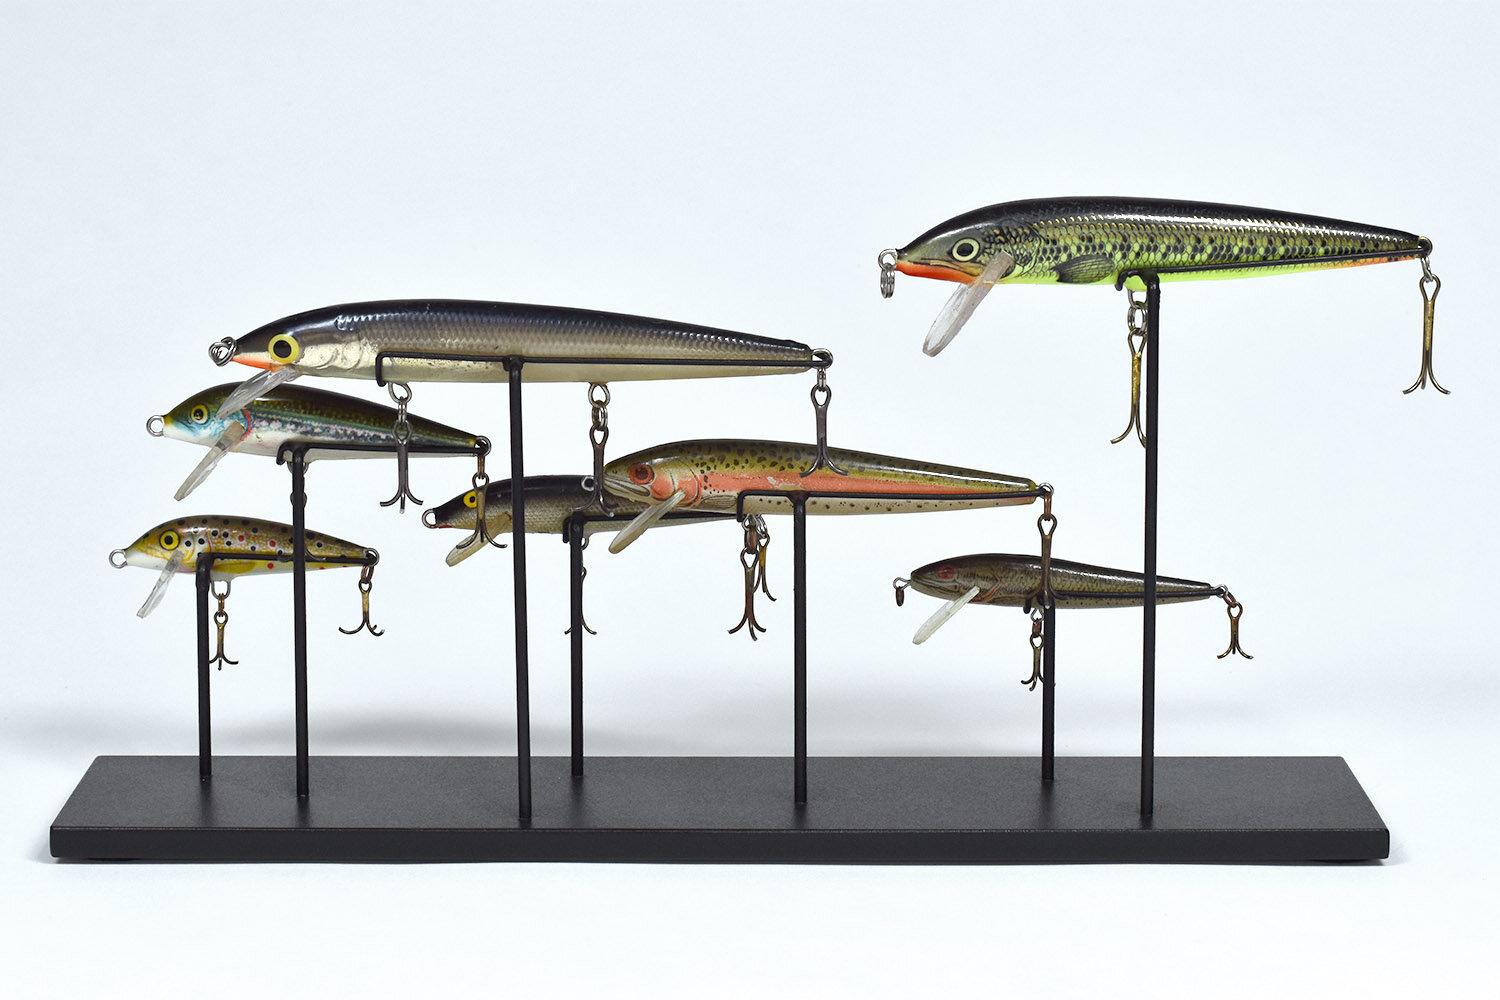 Group of seven freshwater fishing lures collected from Lake Tahoe California

Part of a large group of lures collected over several years from the bottom of Lake Tahoe by a father and son as competitive sport and summer fun. The age and condition